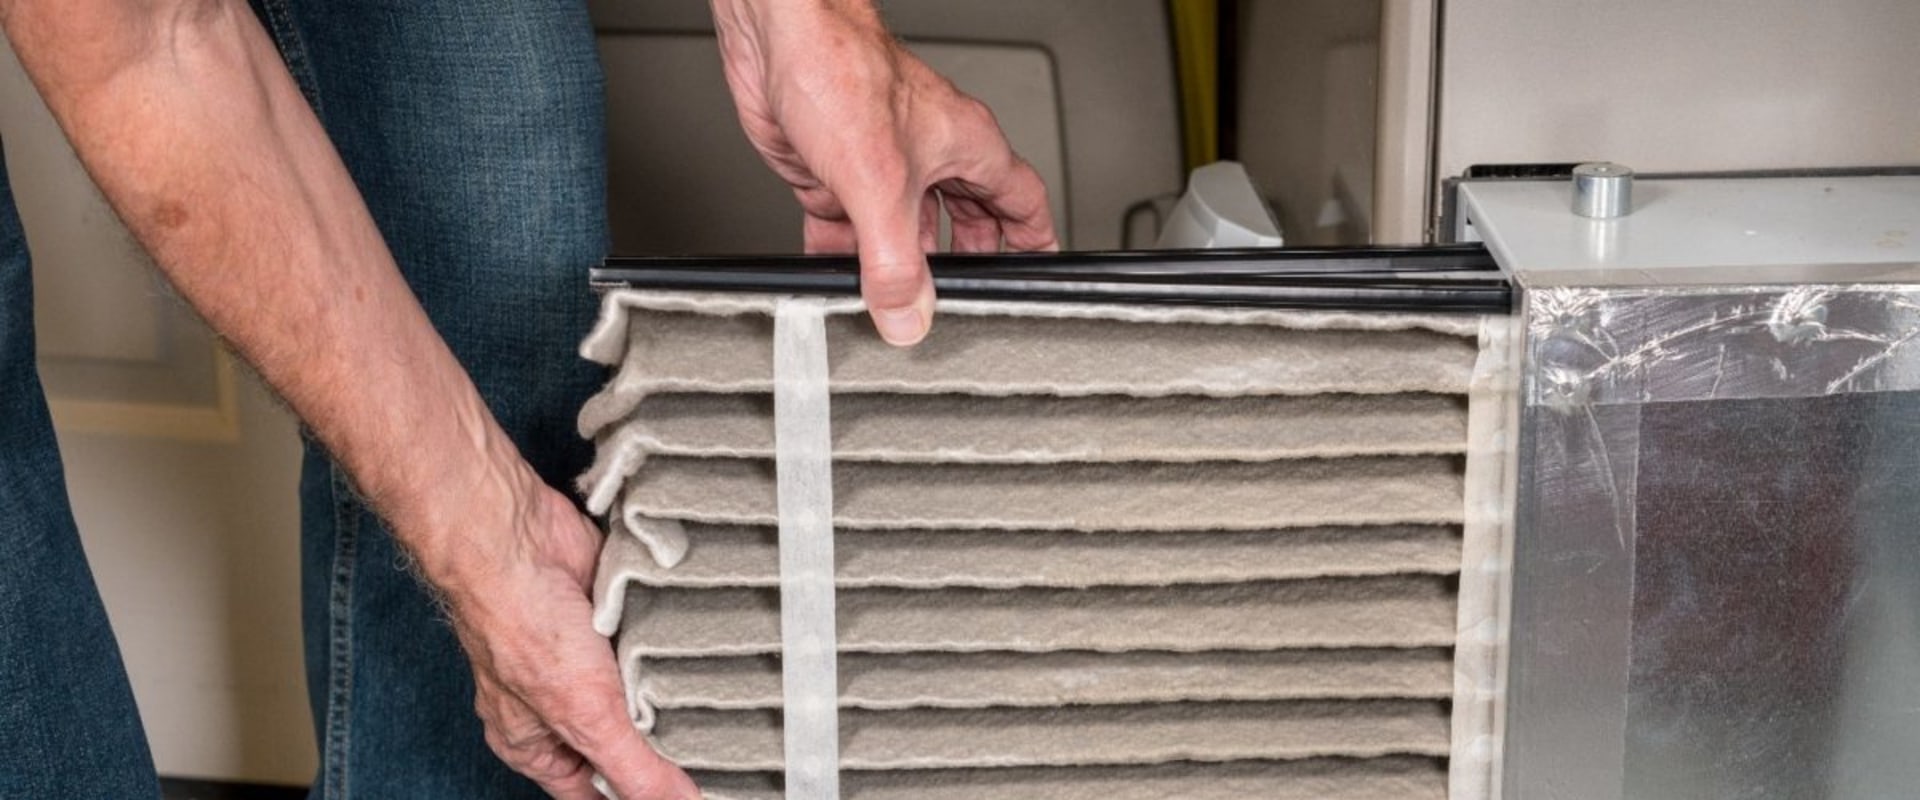 Guide to Rheem HVAC Furnace Air Filter Replacement Sizes for Efficient HVAC Maintenance